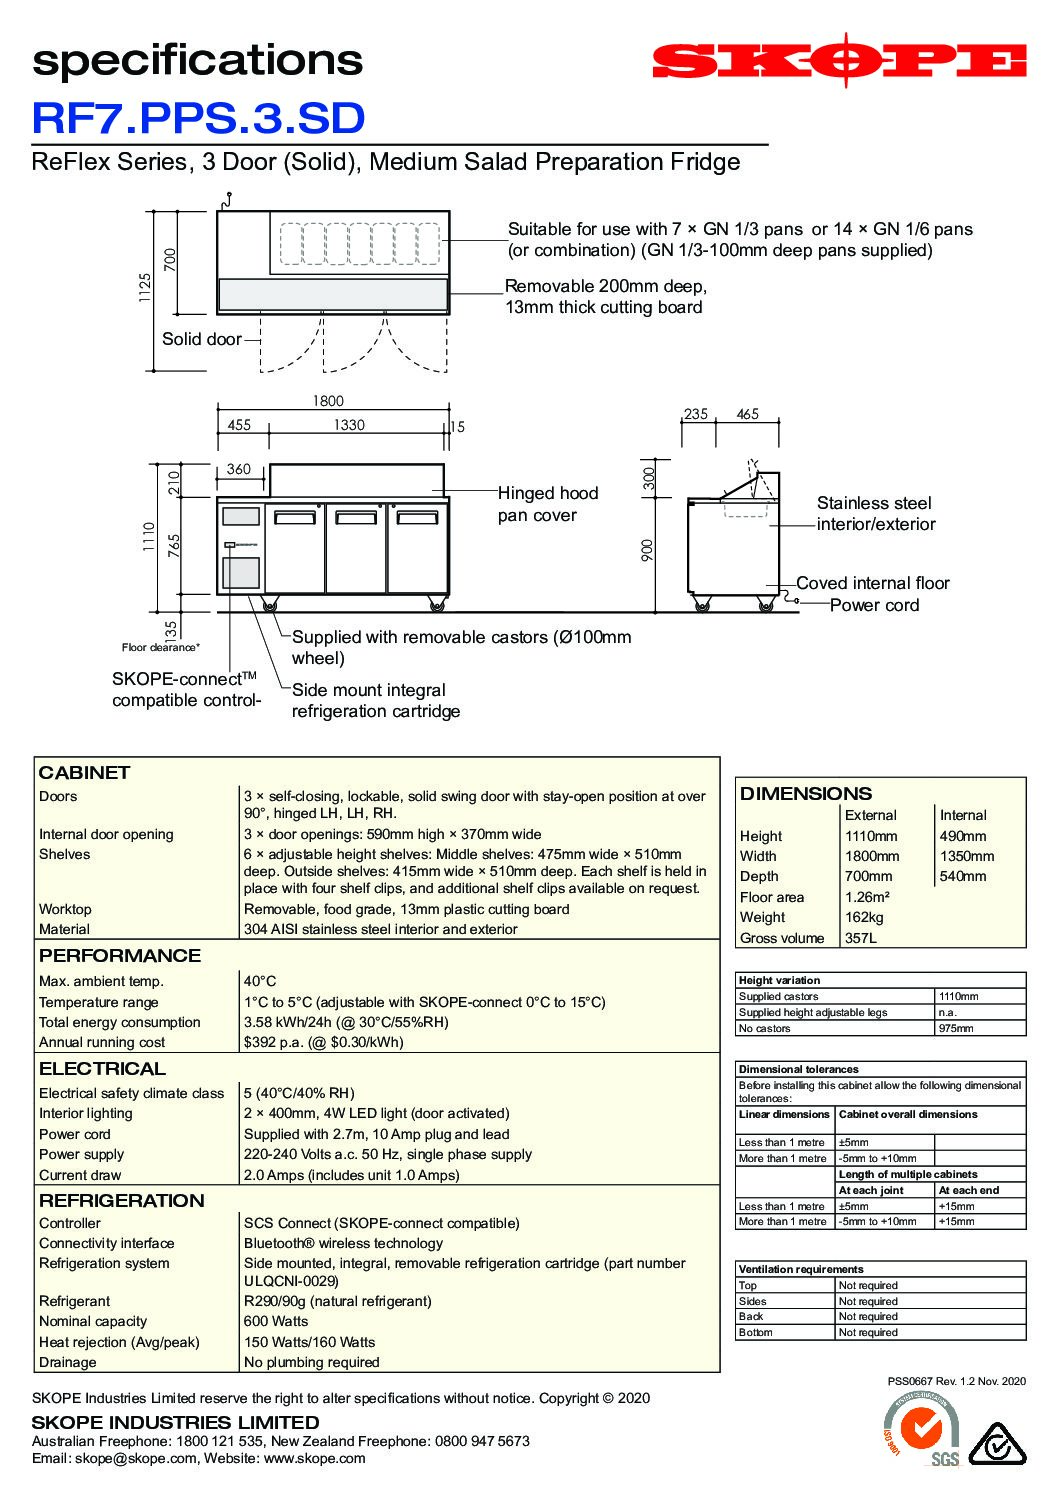 cover page of the ReFlex 3 Solid Door GN Compatible Salad Preparation Fridge specification sheet pdf